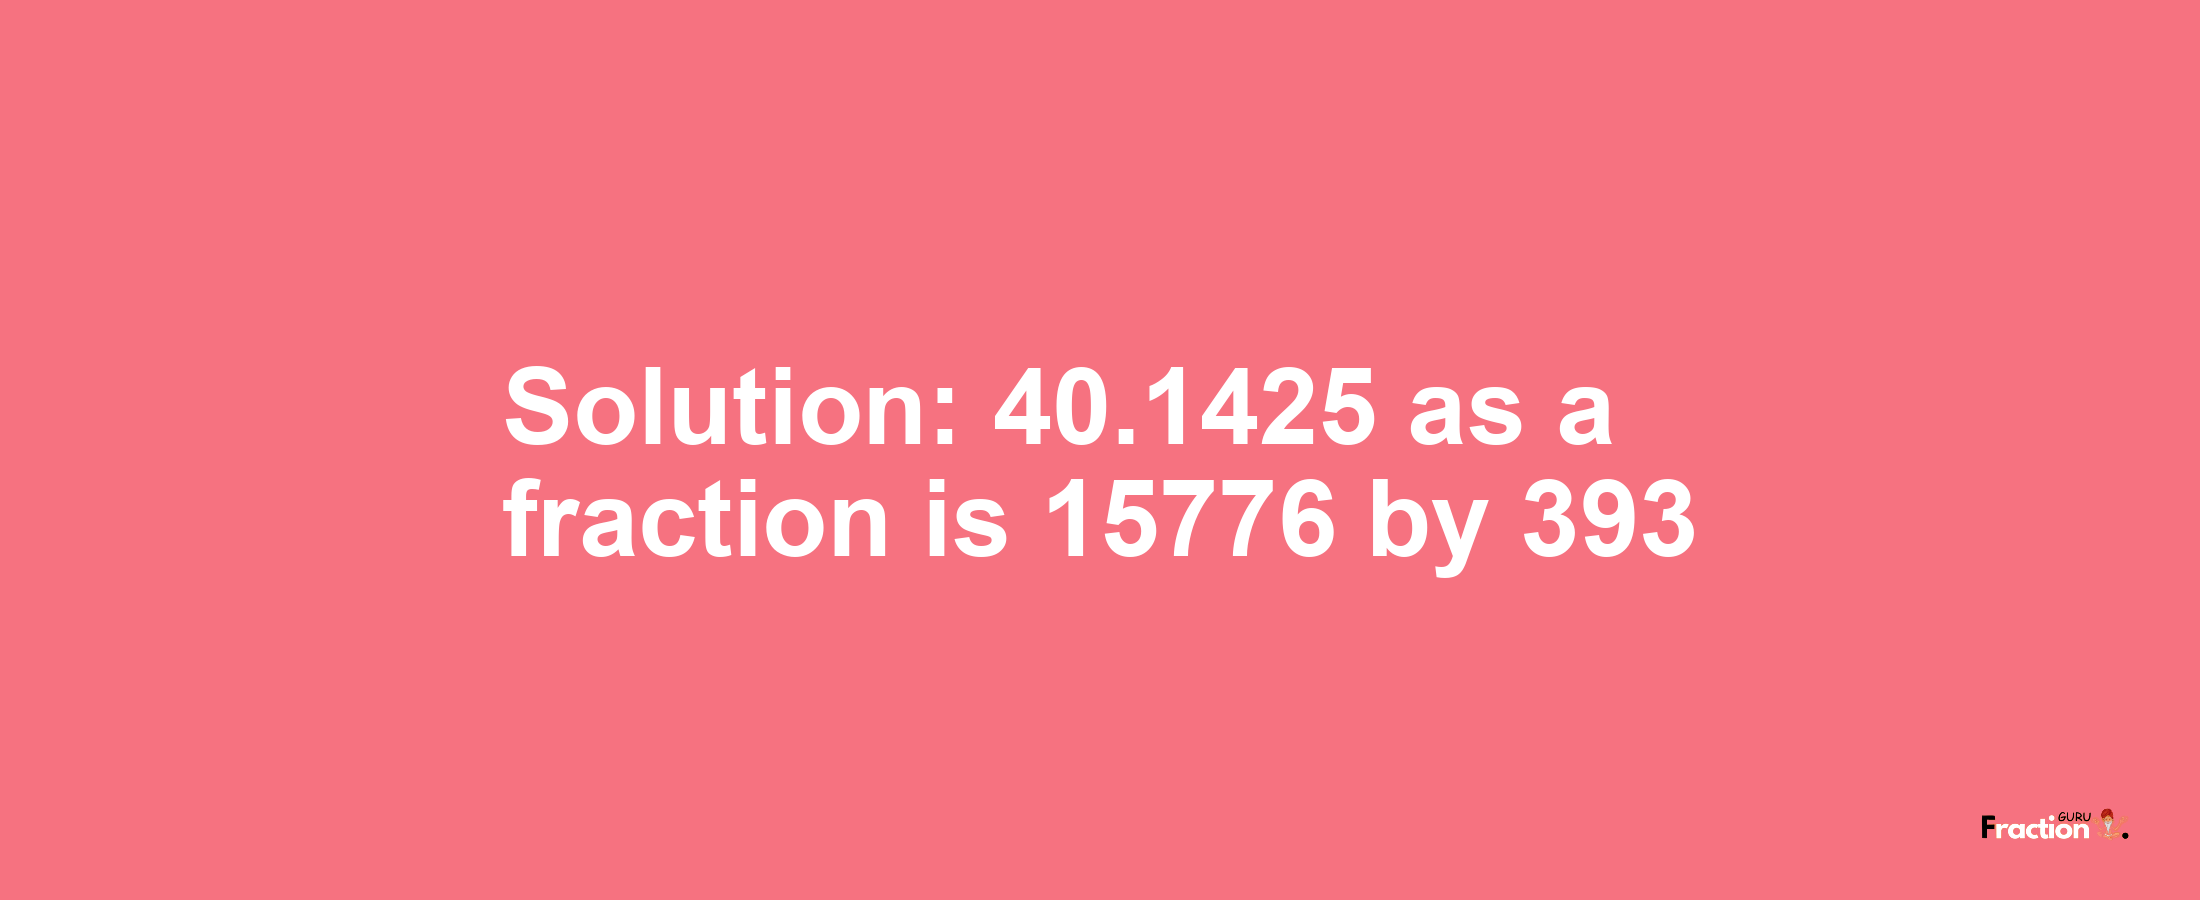 Solution:40.1425 as a fraction is 15776/393